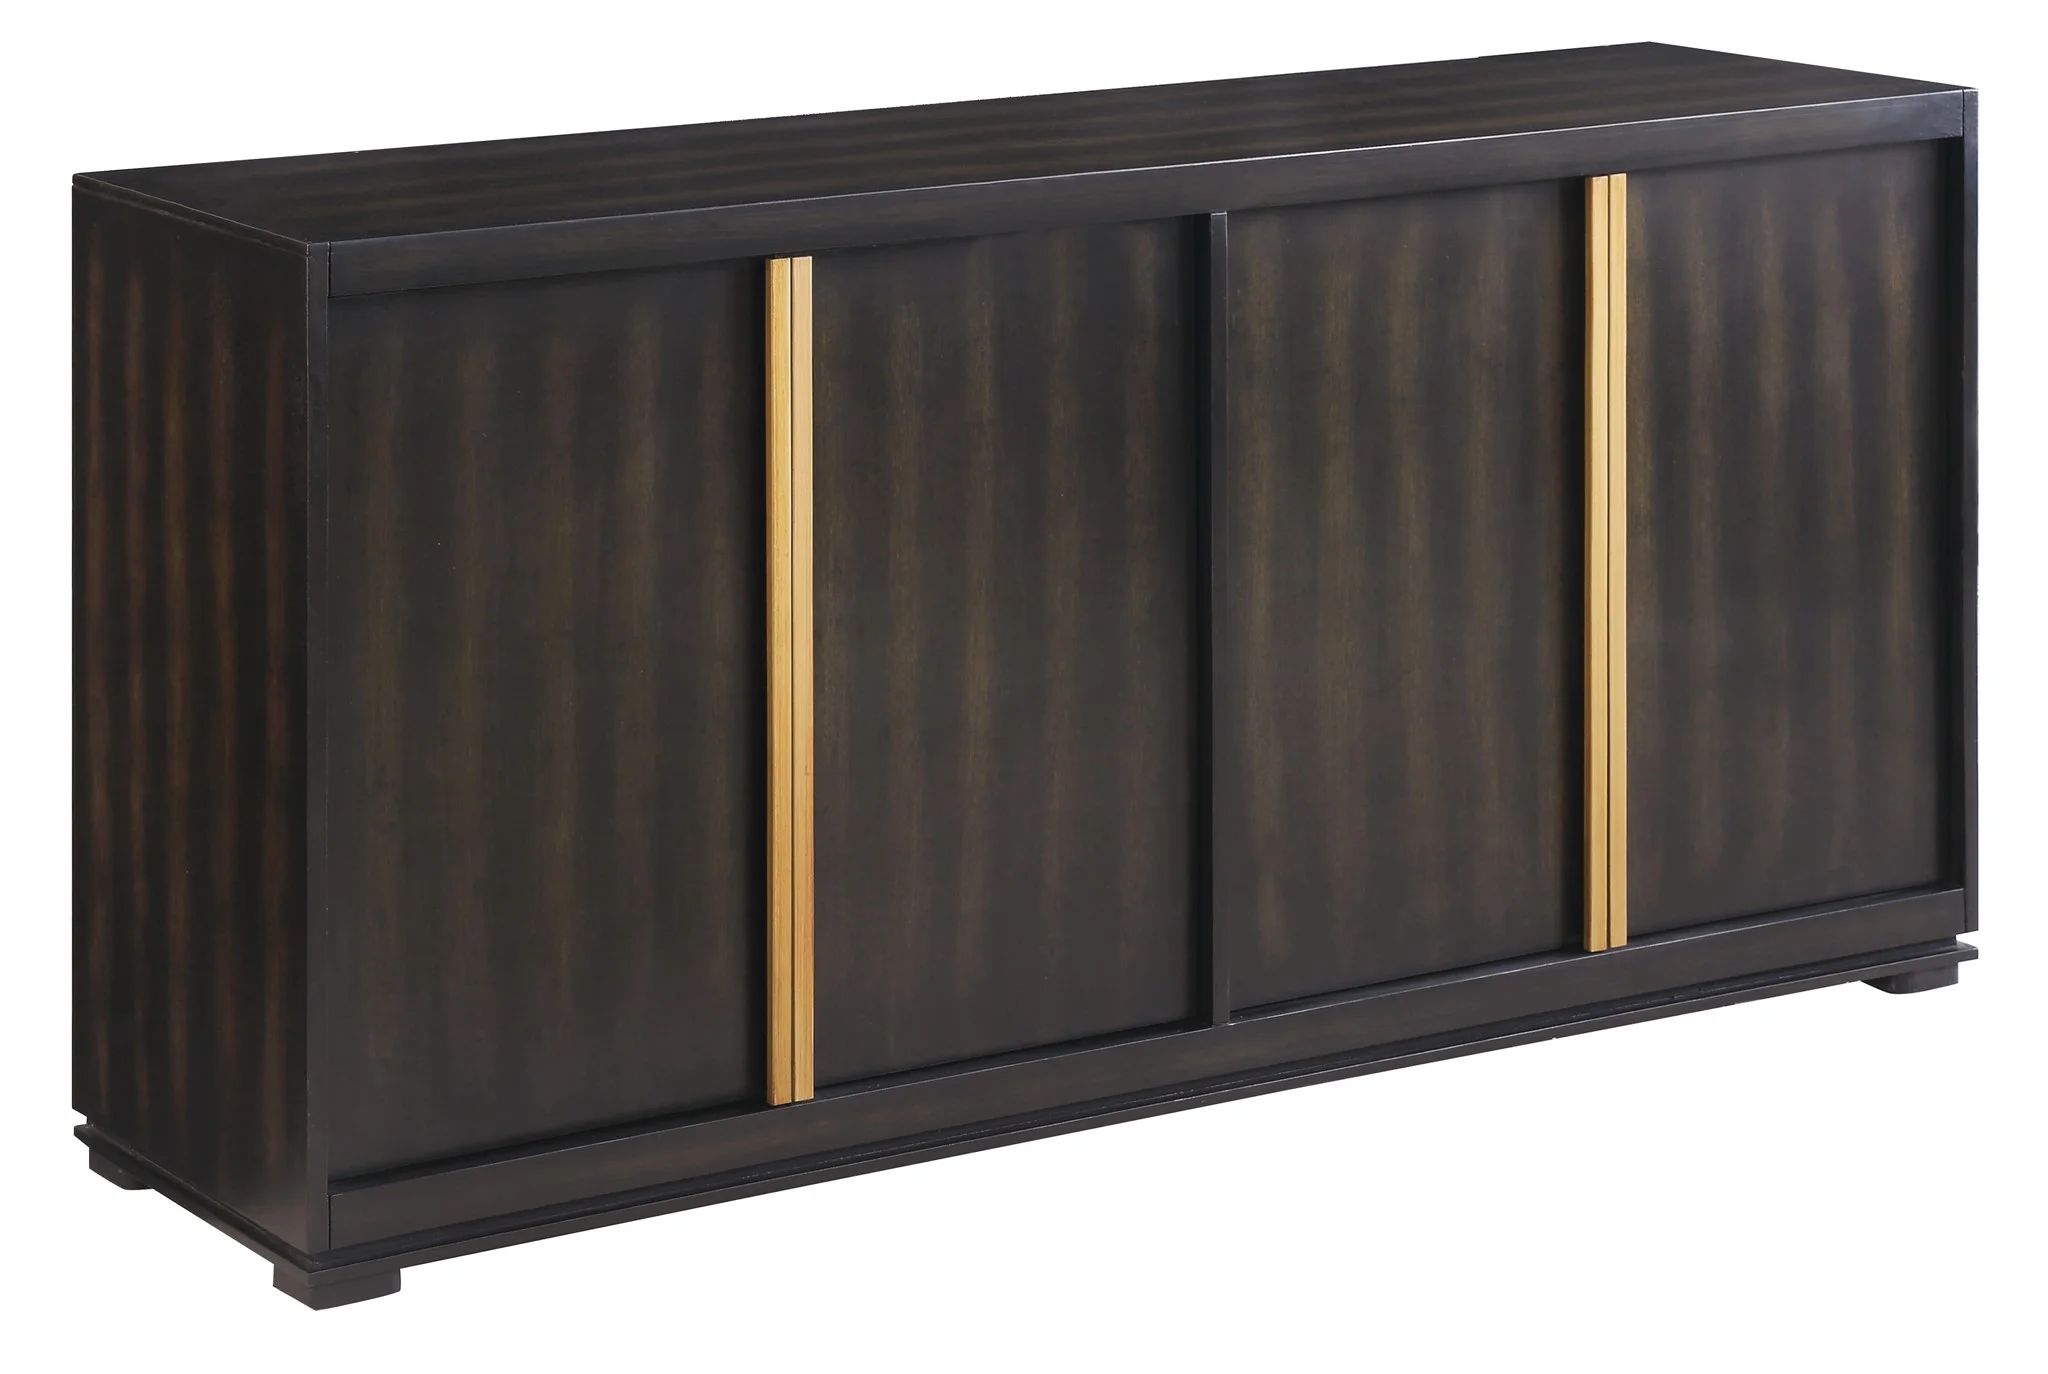 Empire 4 Door Sideboard with Burnished Brass Hardware in Rich Jacobean Finish | Walmart (US)